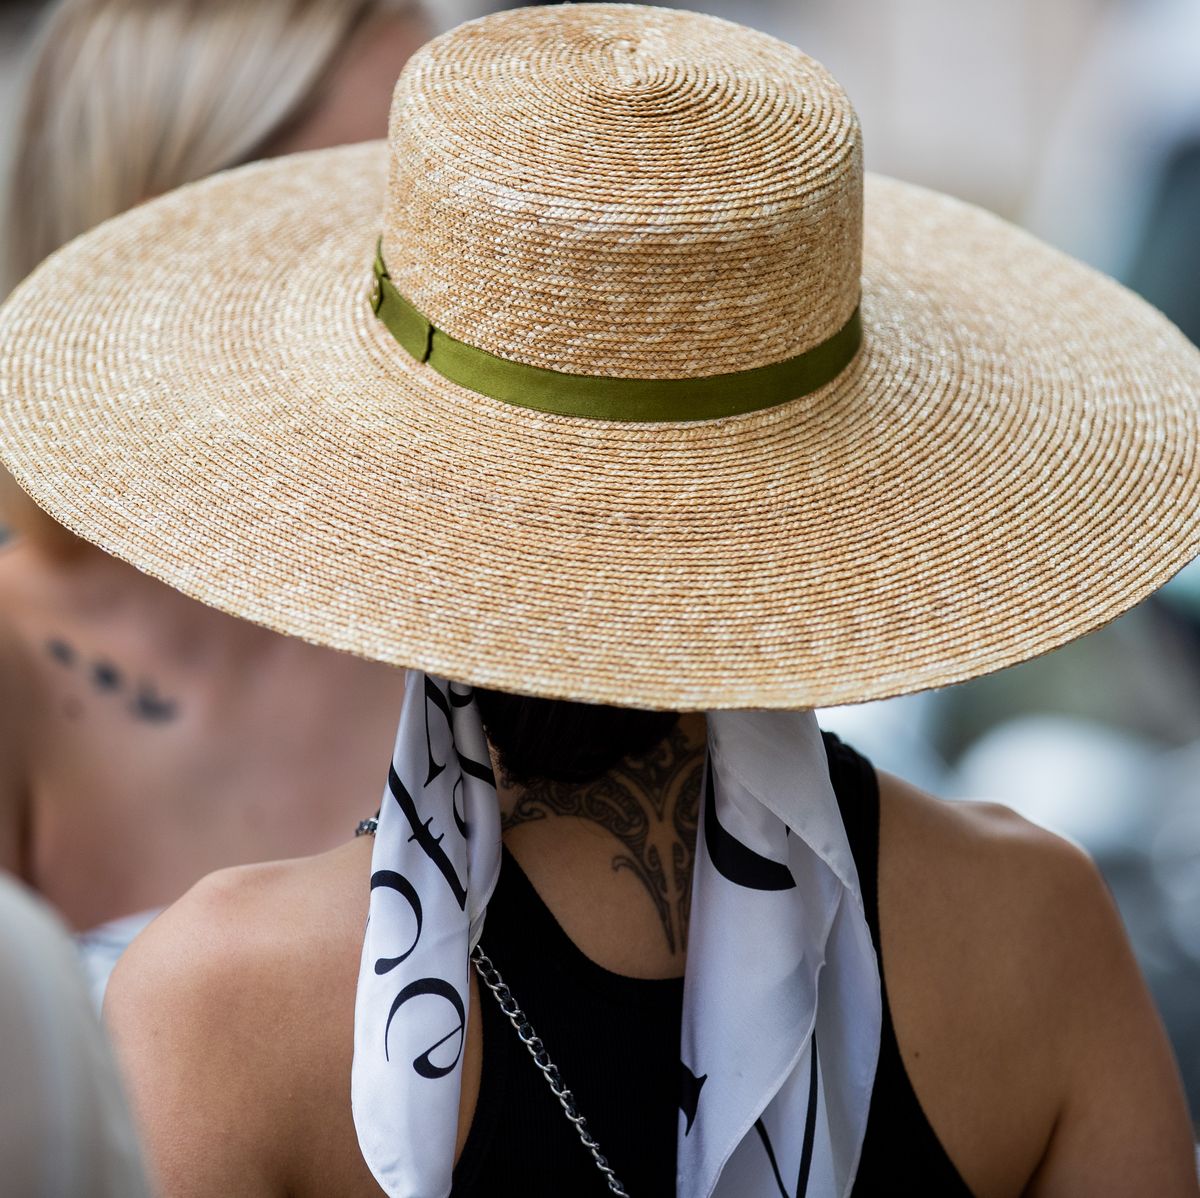 The Best Sun Hats for Women According to Our Readers